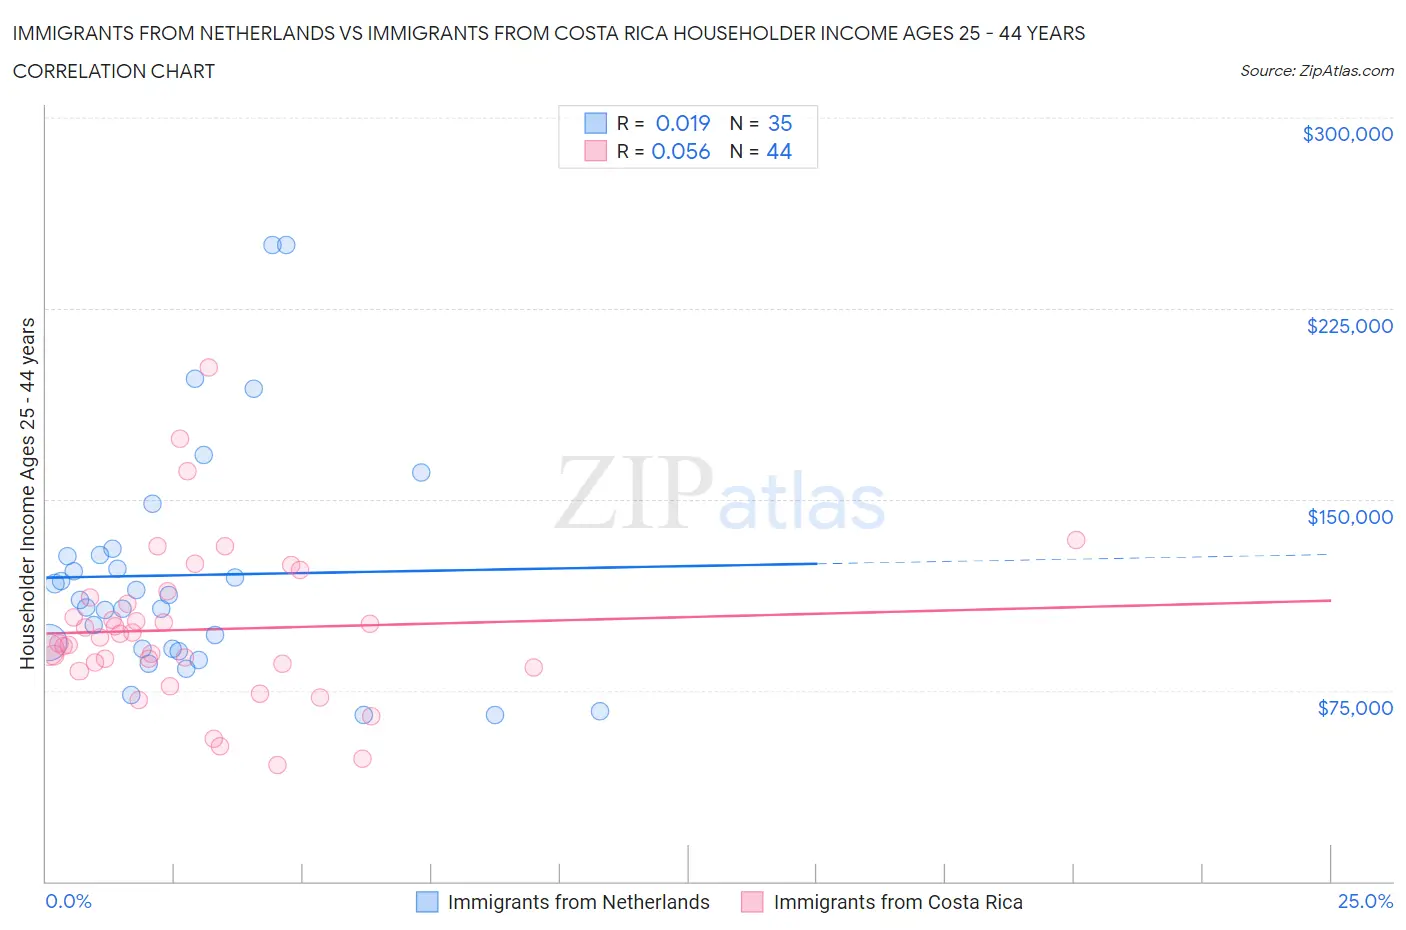 Immigrants from Netherlands vs Immigrants from Costa Rica Householder Income Ages 25 - 44 years